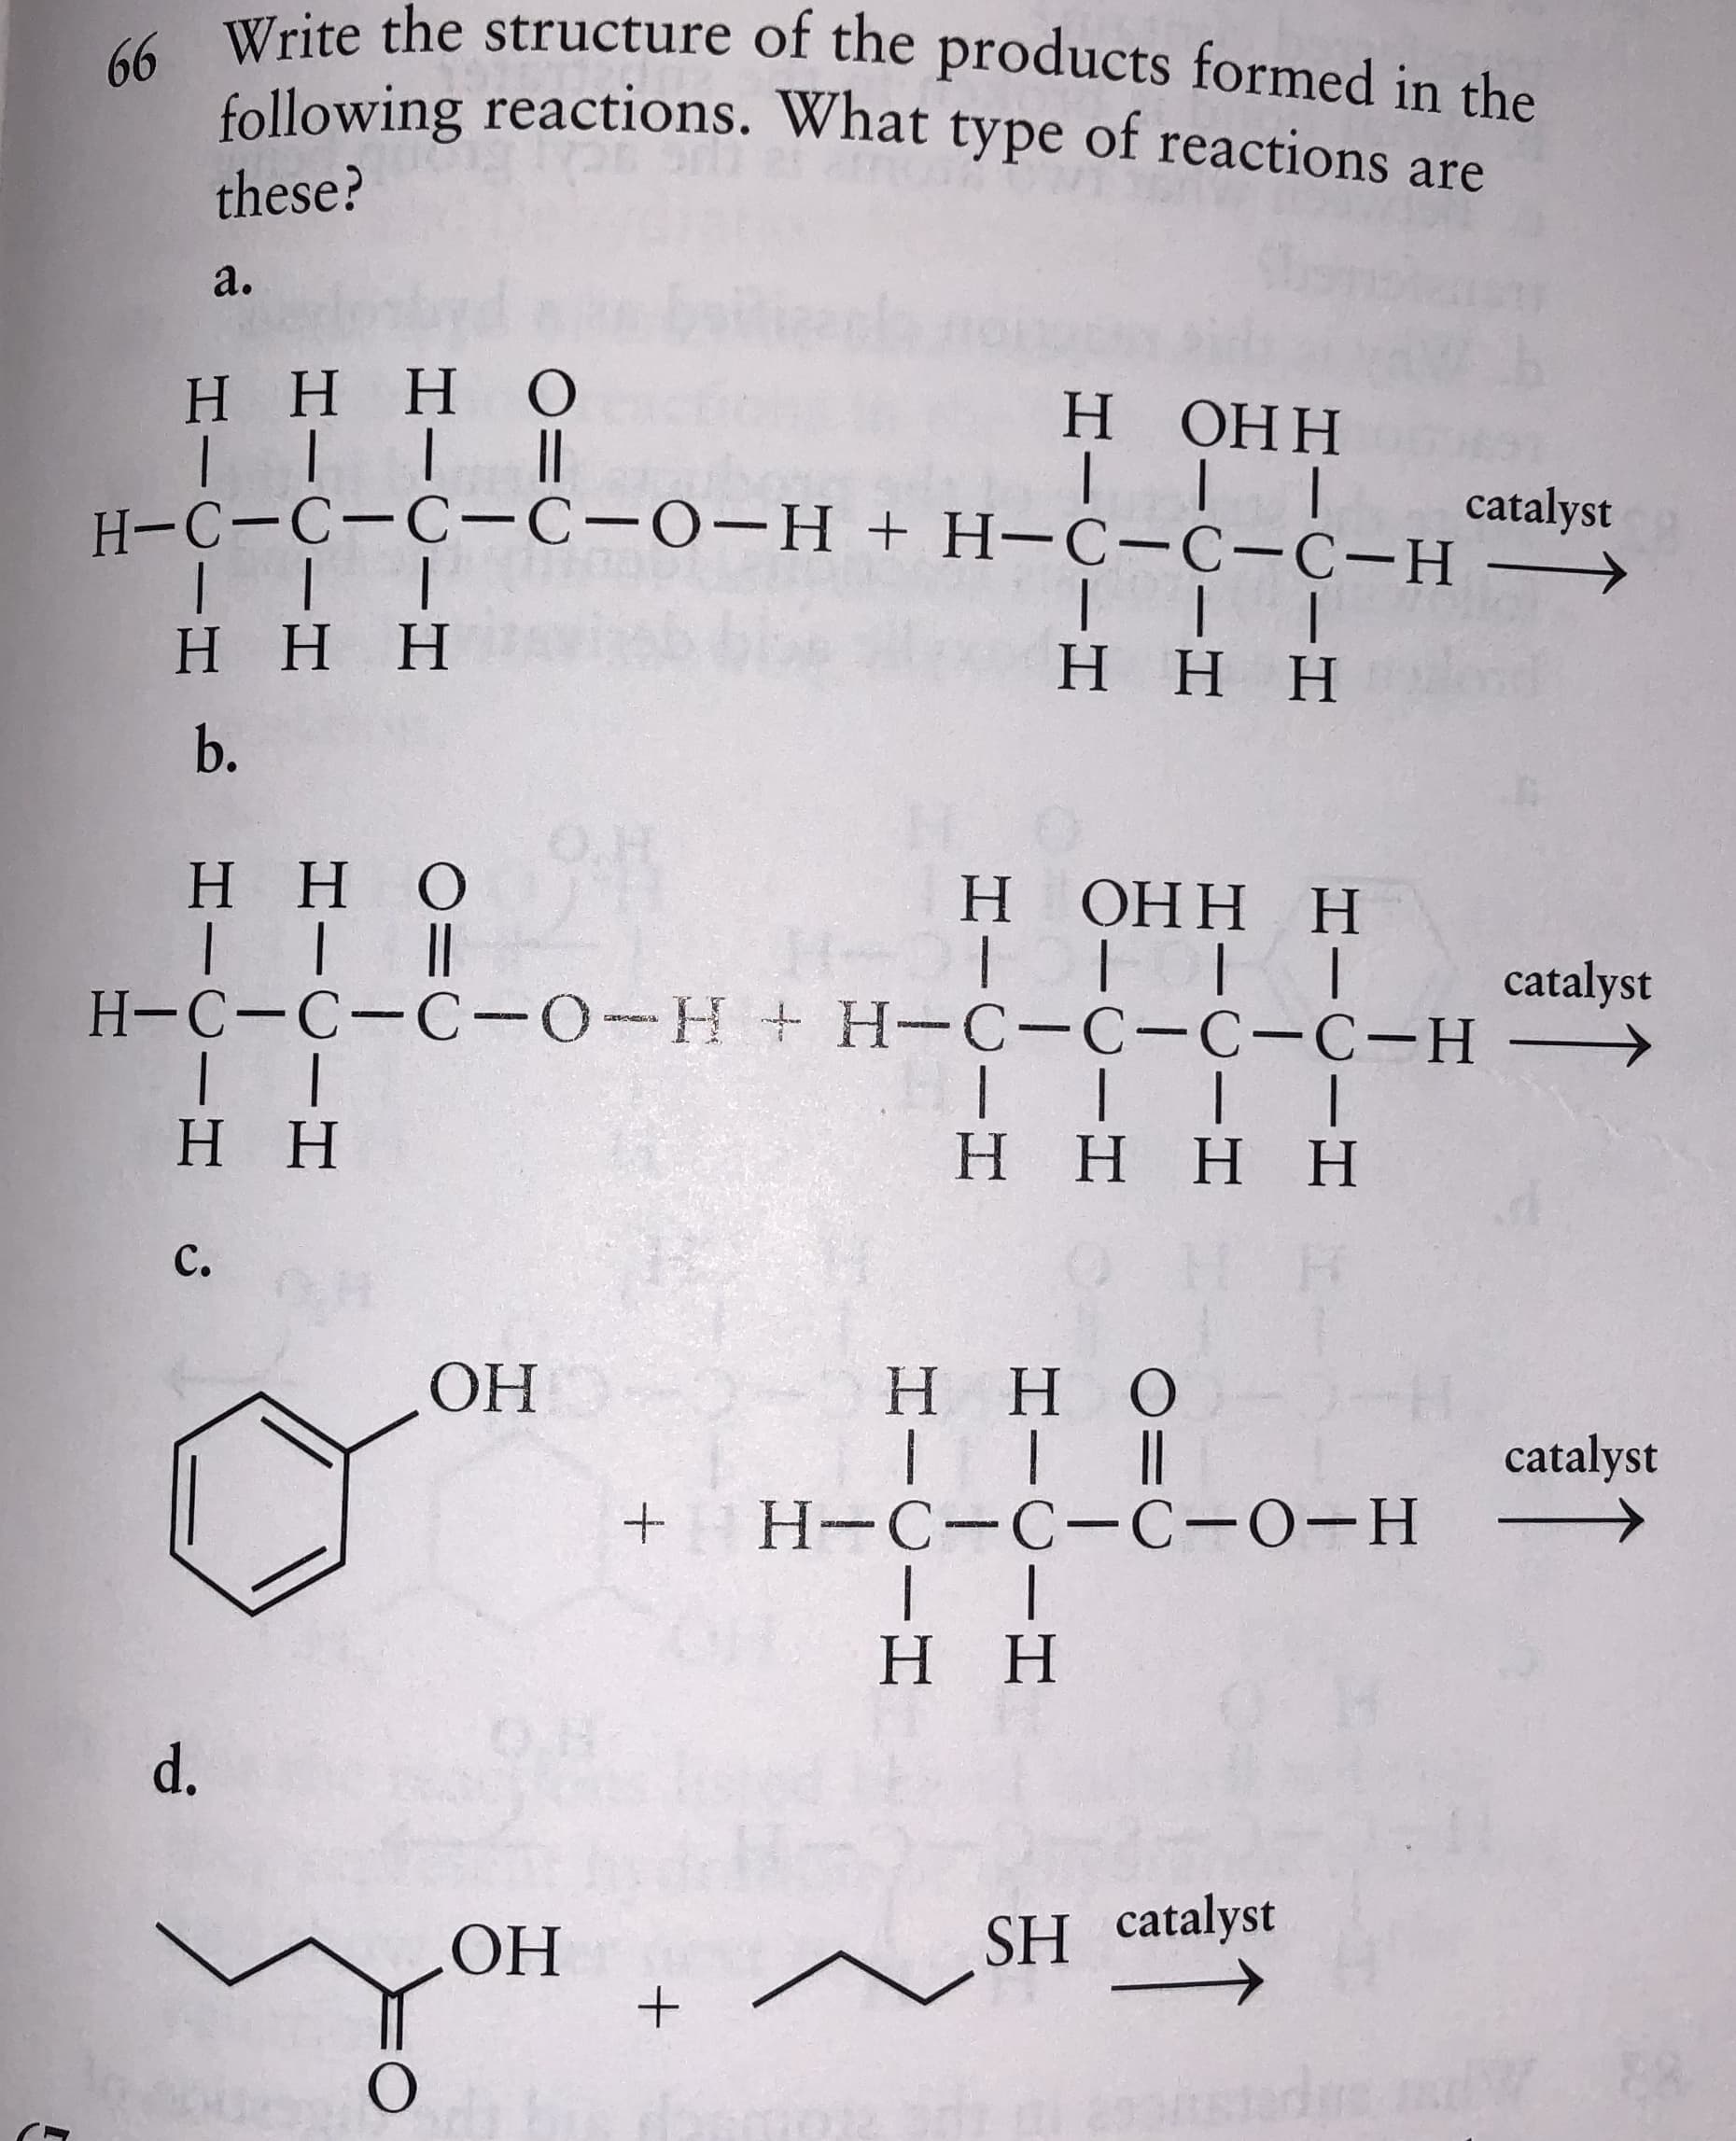 4 Write the structure of the products formed in the
following reactions. What type of reactions are
these?
a.
НННО
н ОНН
catalyst
Н-С-С-С—С-0-Н + H-С-с-С-н —
ННН
нНн
b.
O.H
нно
Н ОНН Н
catalyst
H-C-C-C-0-H+H-C-C-C-C-H-
НН
нннН
C.
ОН
Нно
catalyst
Н-С-С-С-о-Н
нн
O.8
d.
ОН
SH catalyst
stads
